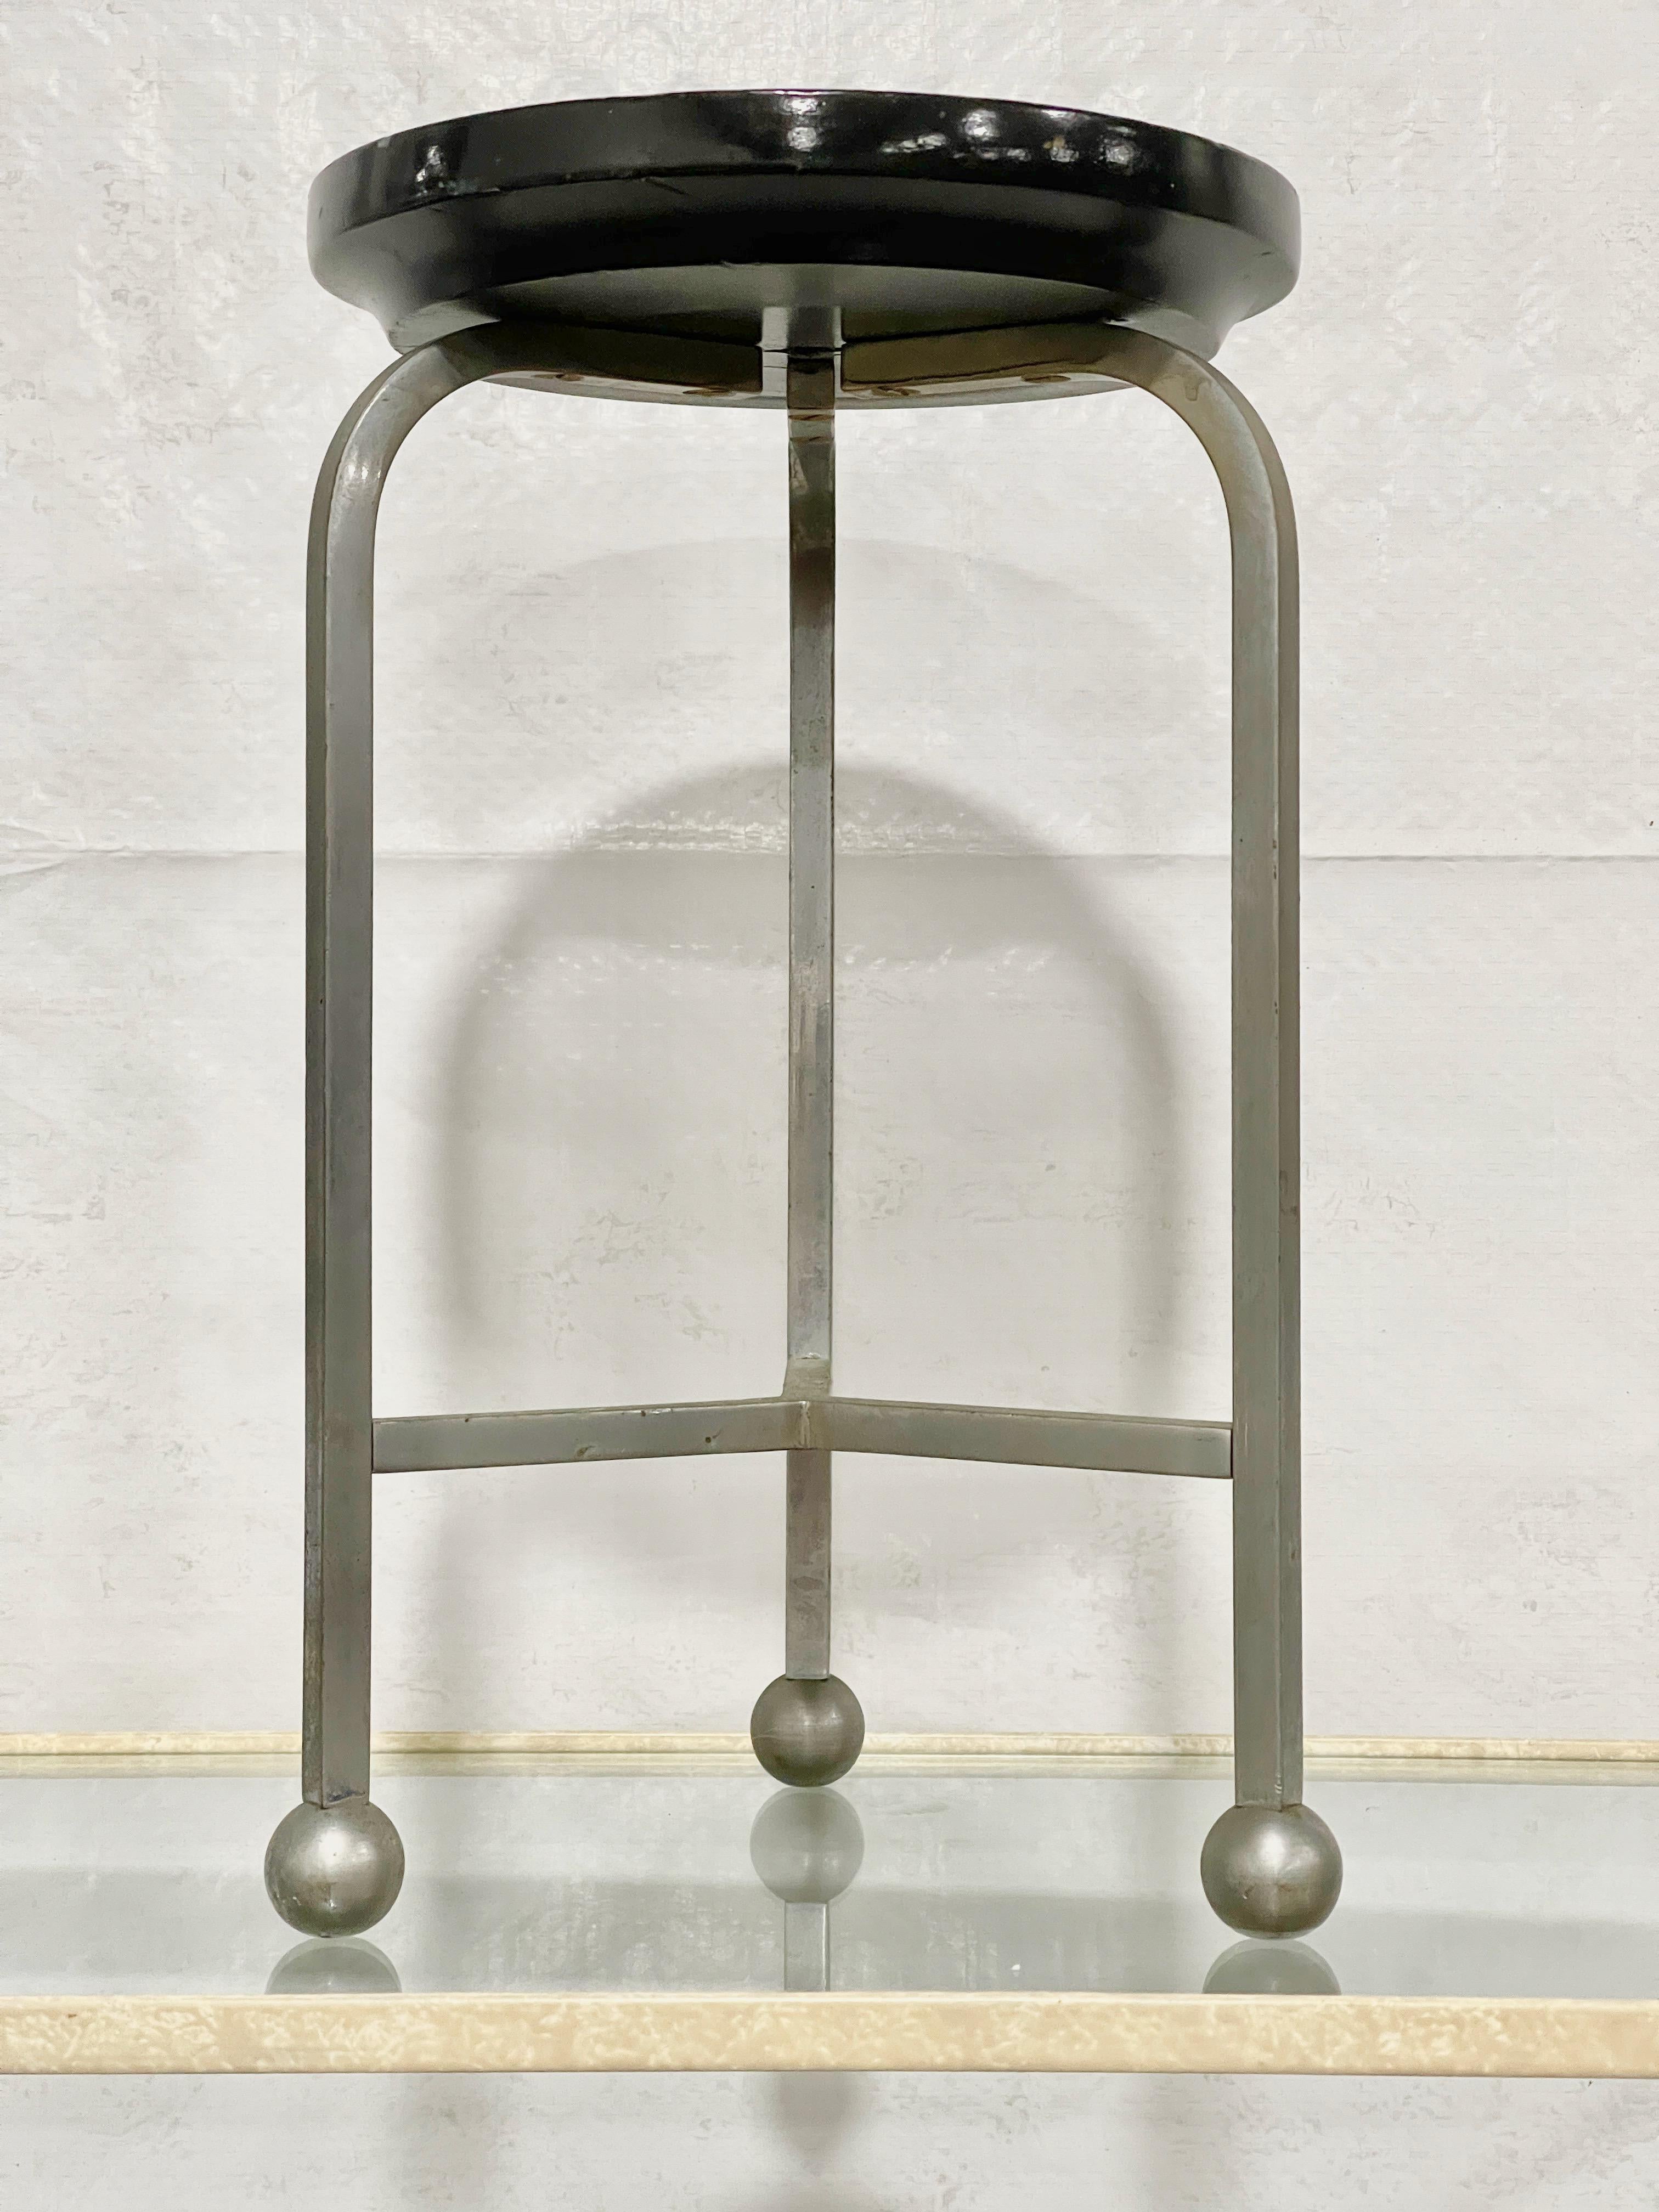 Interesting and unusual miniature Bauhaus 3-leg stool, possibly a salesman's sample or maquette. 
Round seat is black lacquered turned wood ~7.5 inches diameter by 1 inch thick. 
Three curved arc legs on ball feet with tripod stretcher stand 12